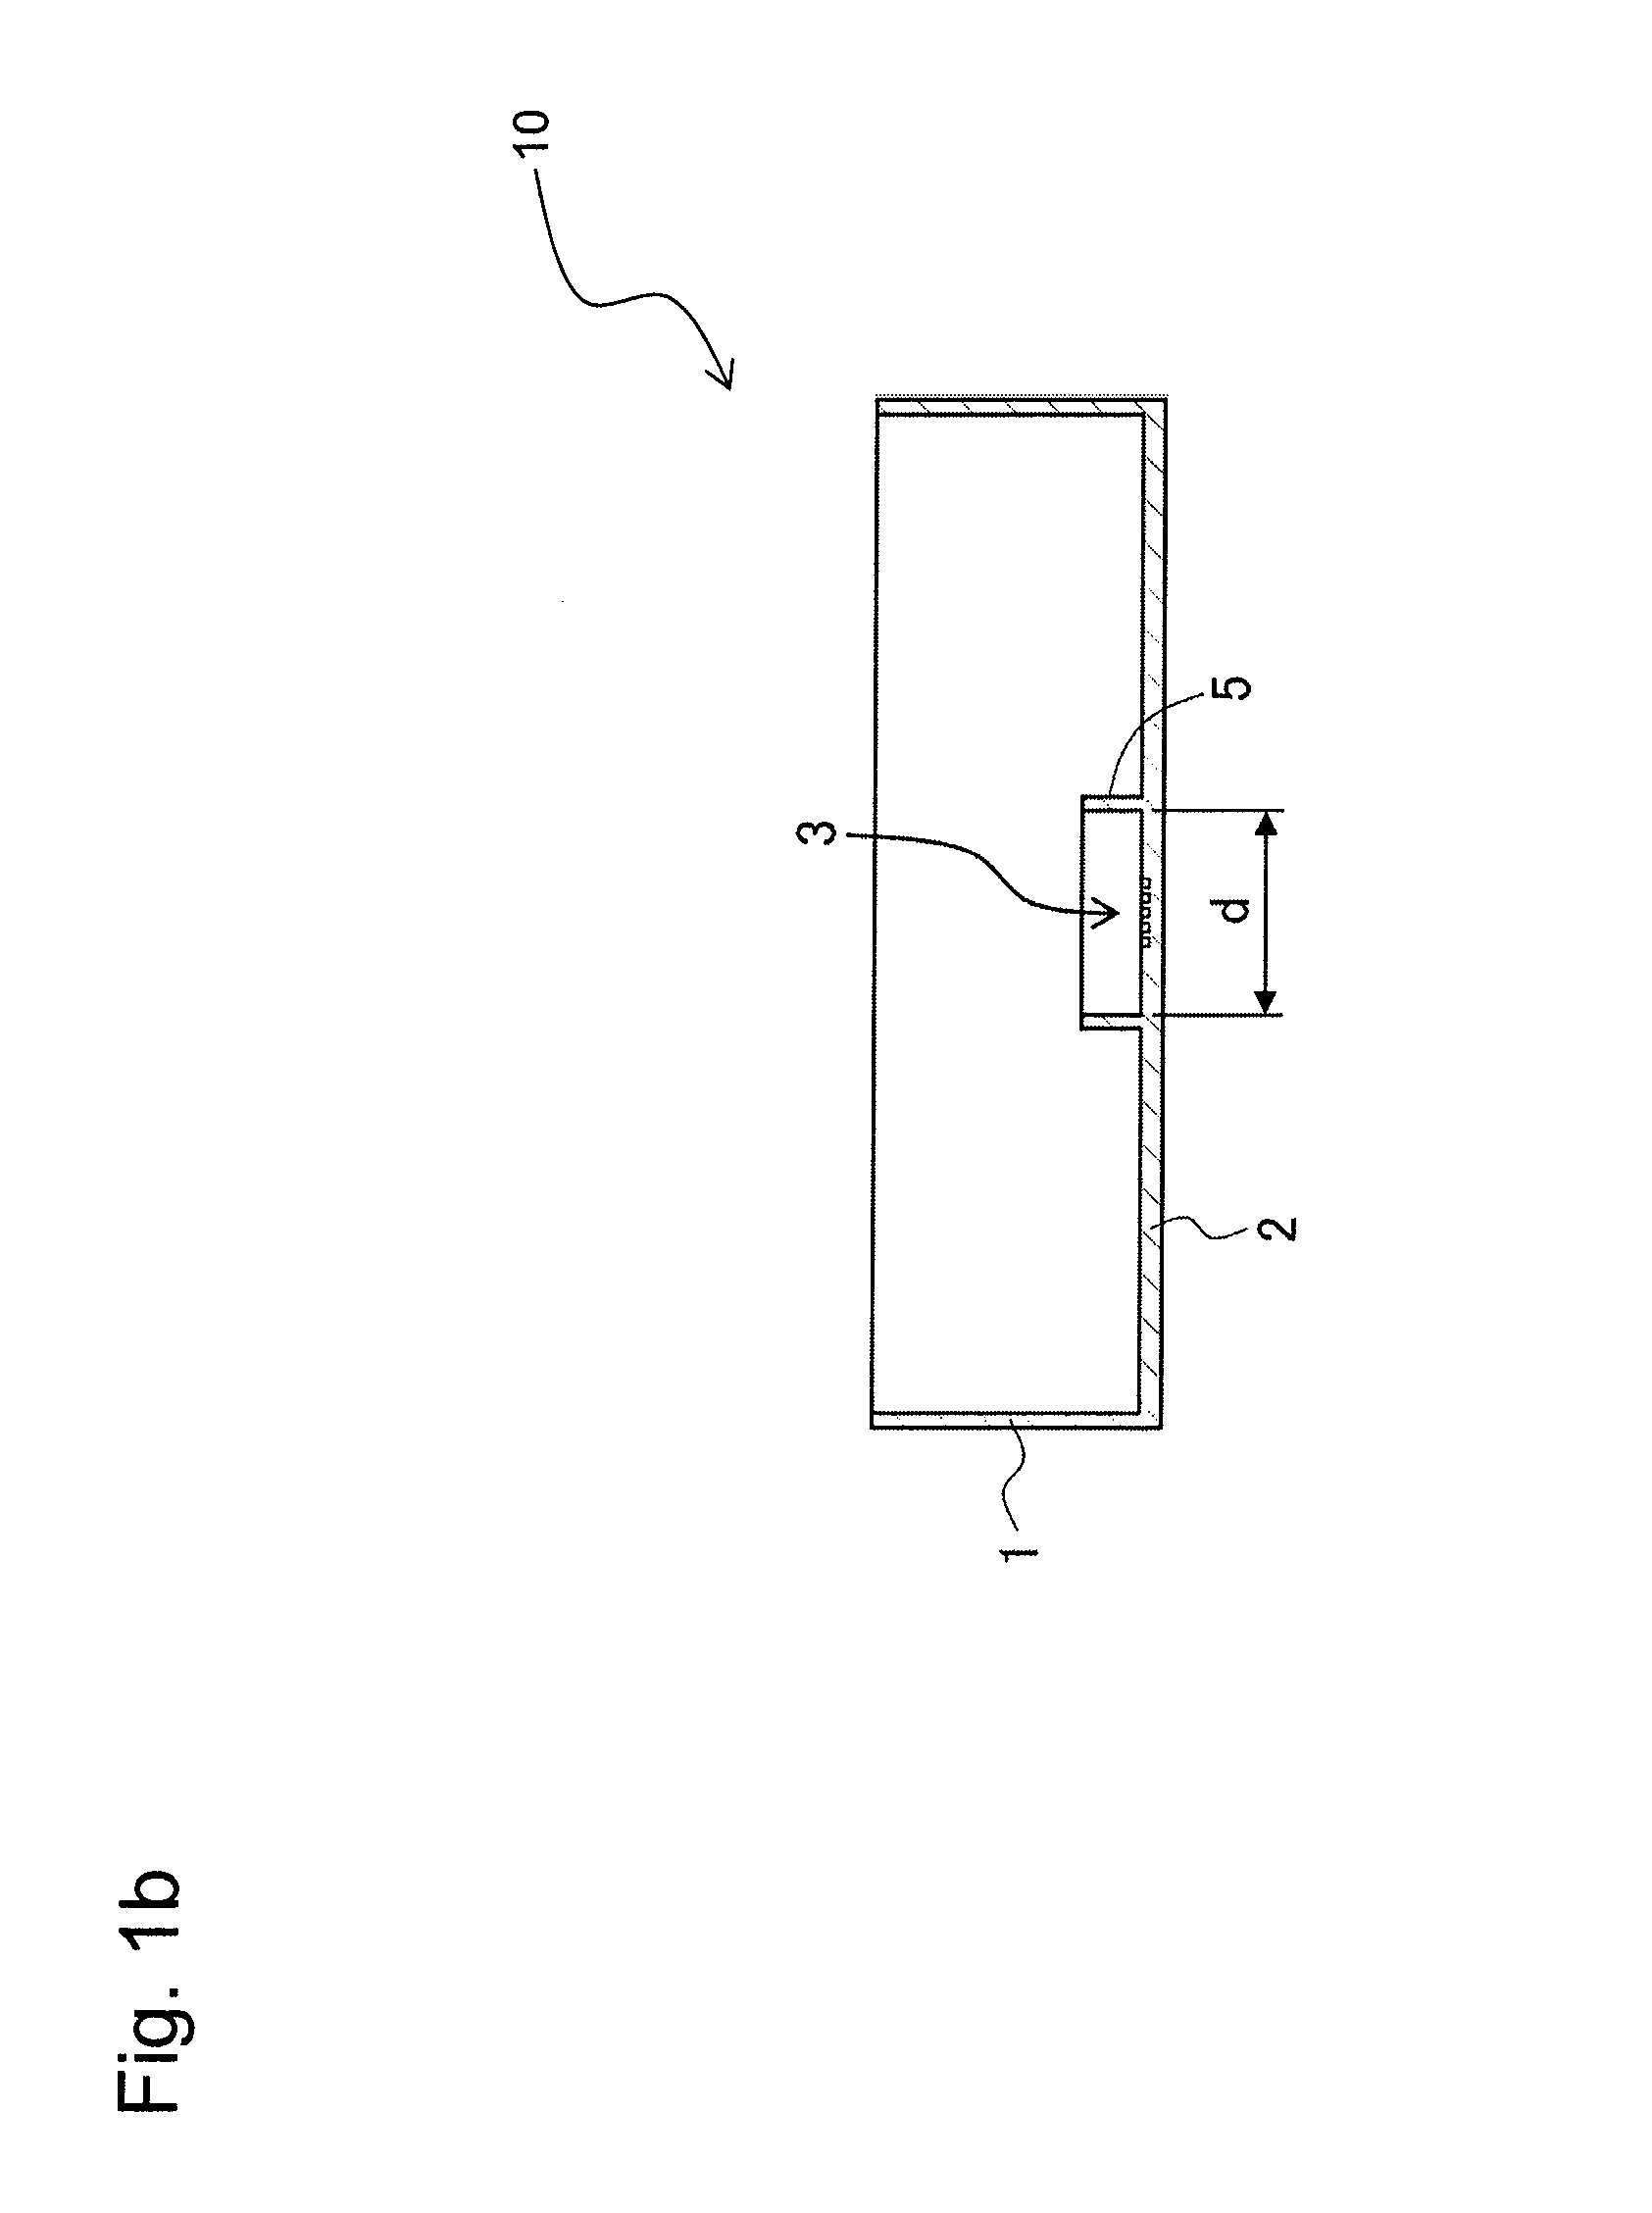 Method for producing embryos by in vitro culture, and method, apparatus, and system for selecting embryos